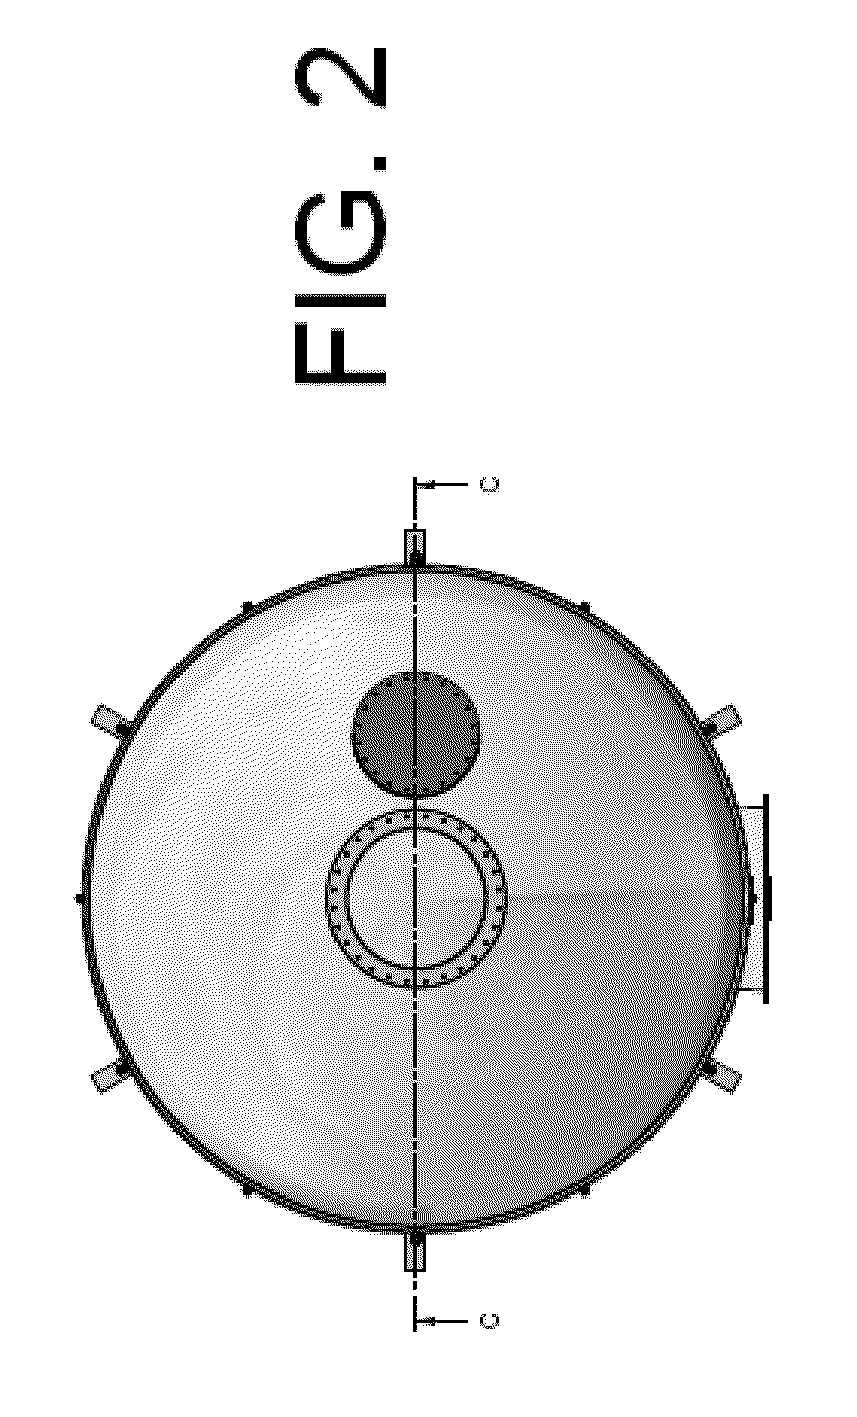 Device for purifying gases, such as air in particular, or liquids, such as water in particular